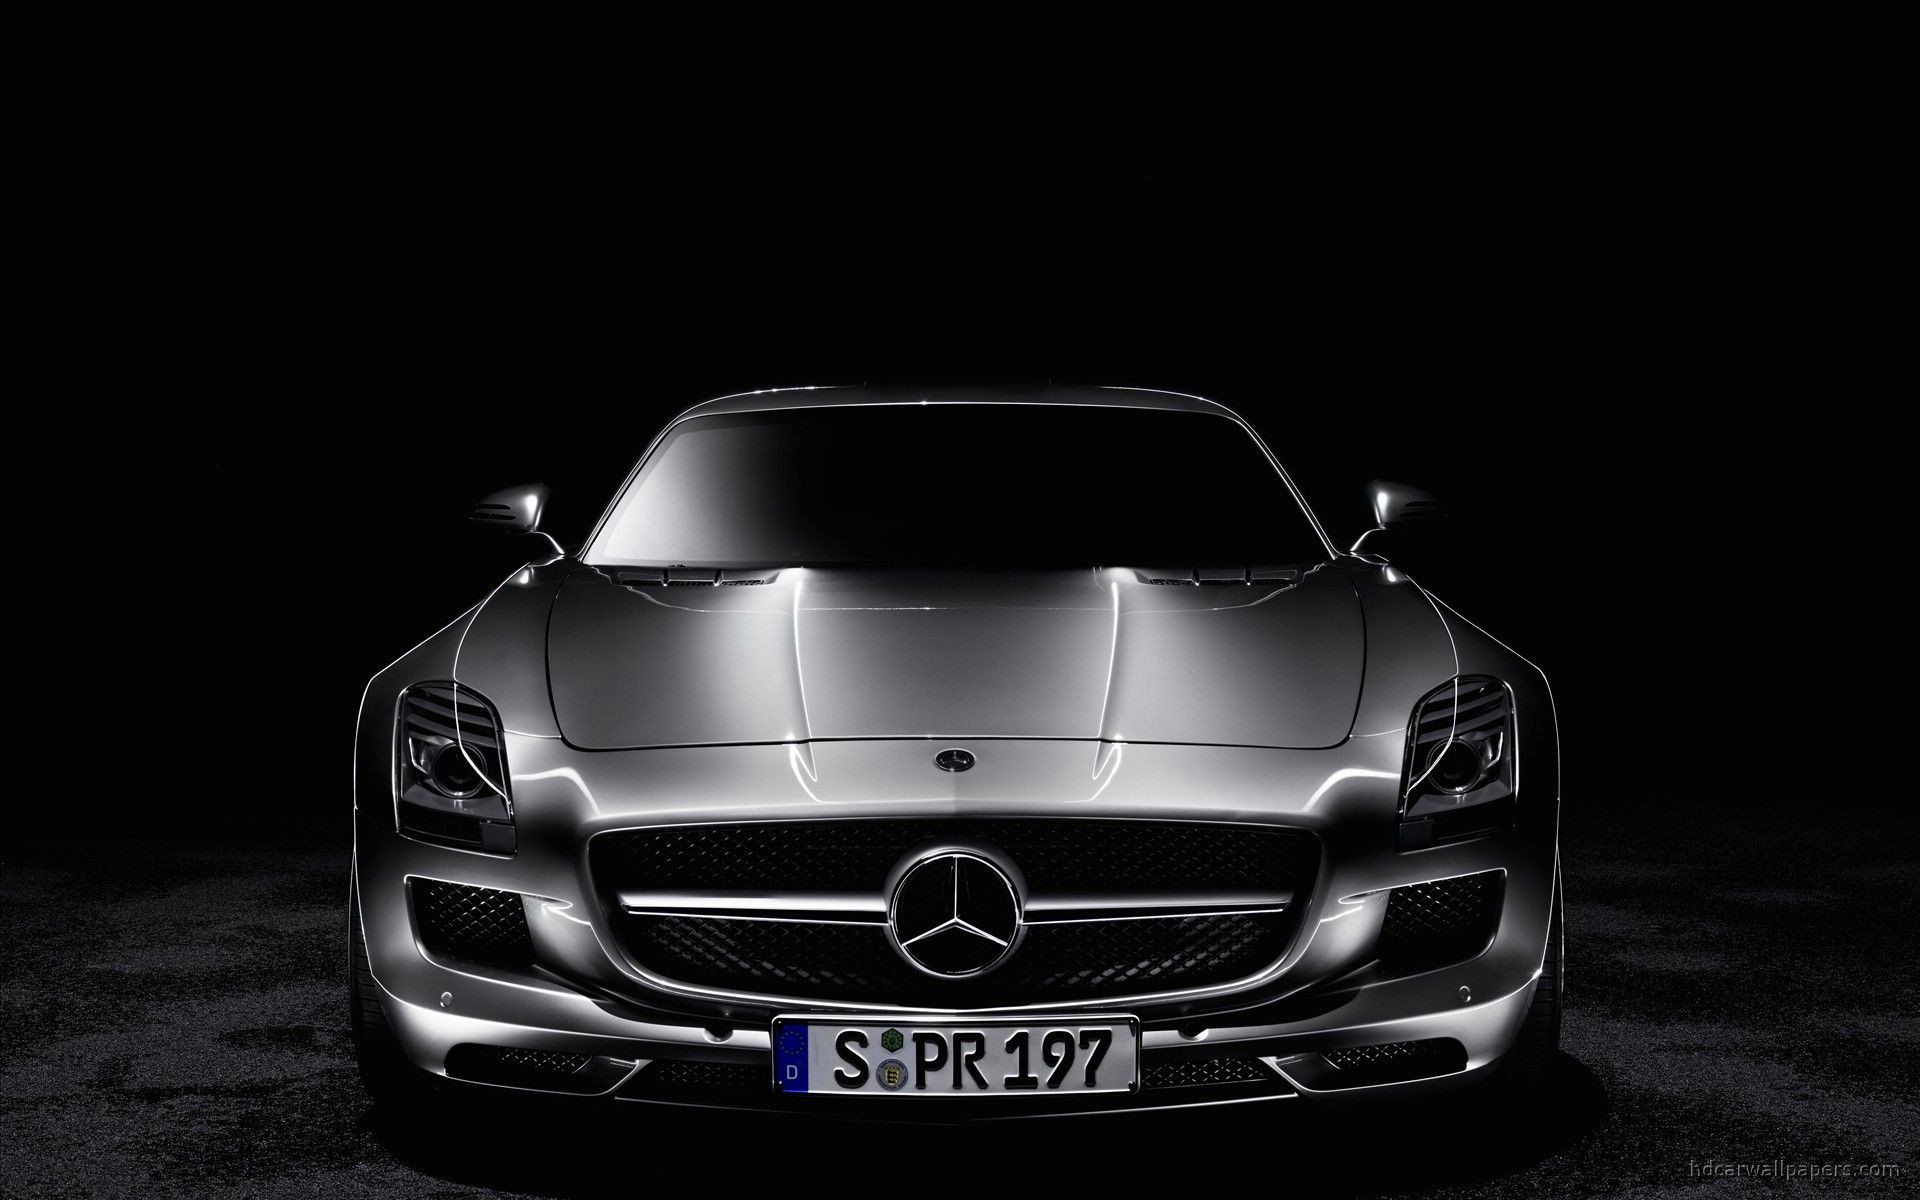 Mercedes Benz Logo Wallpapers 60 Pictures